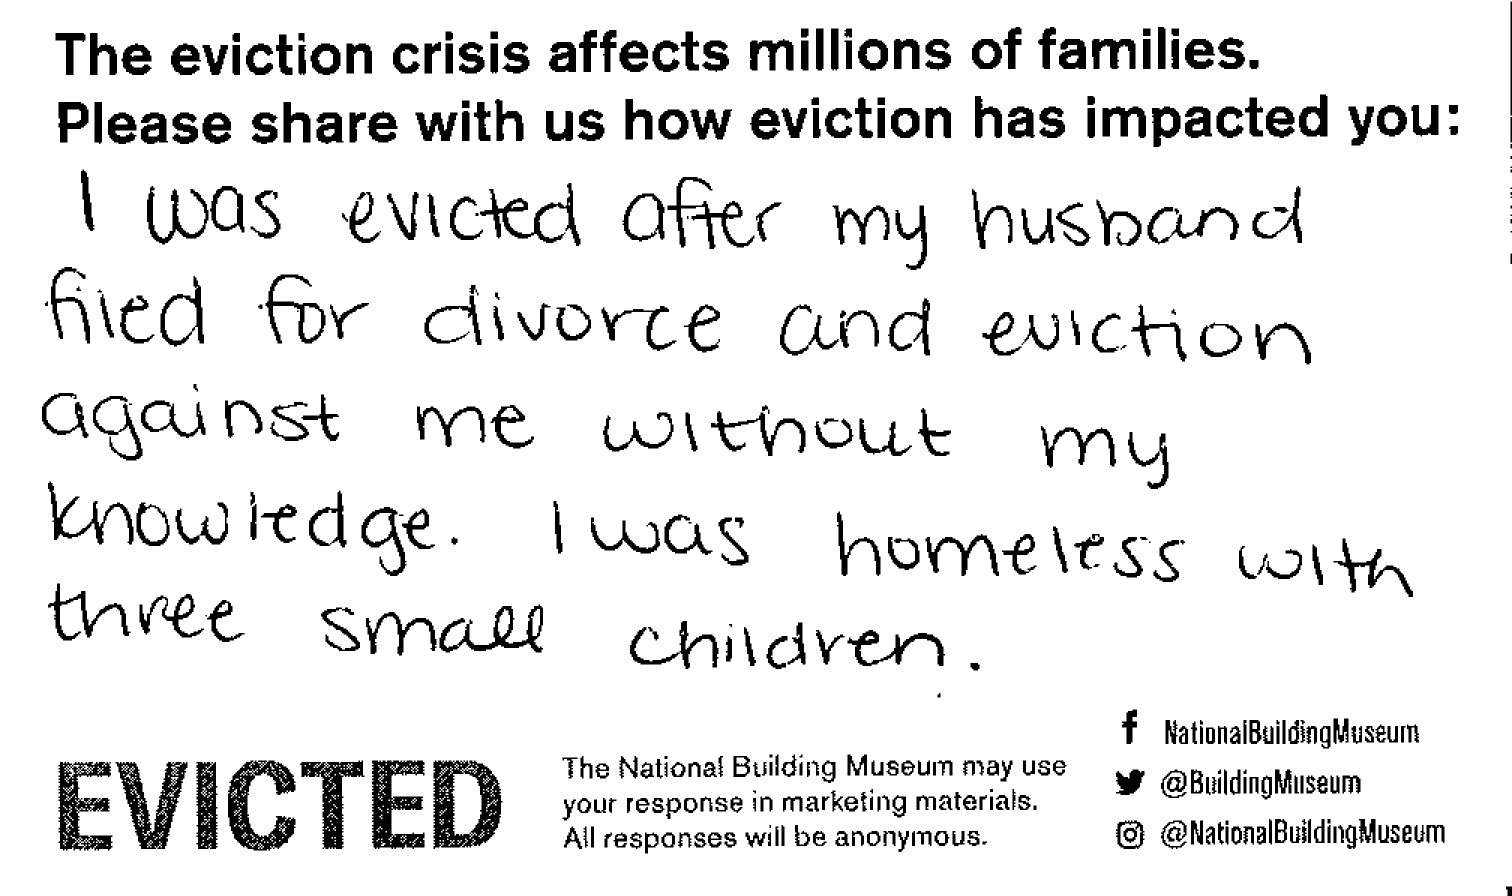 I was evicted after my husband filed for divorce and eviction against me without my knowledge. I was homeless with three small children.